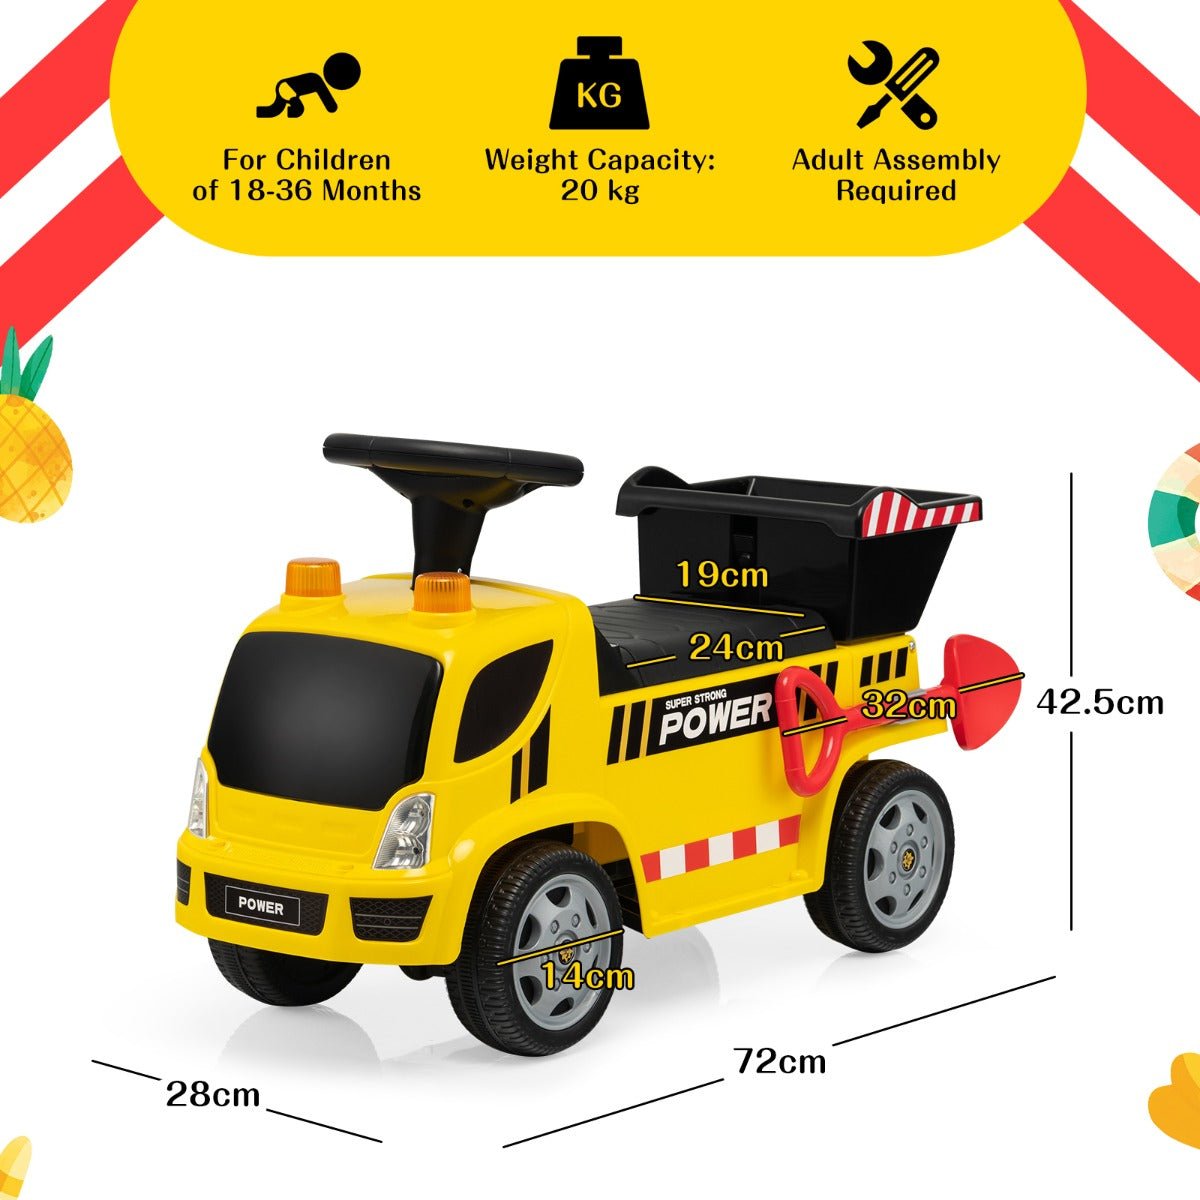 Experience Joy with the Yellow Ride-On Toy Truck